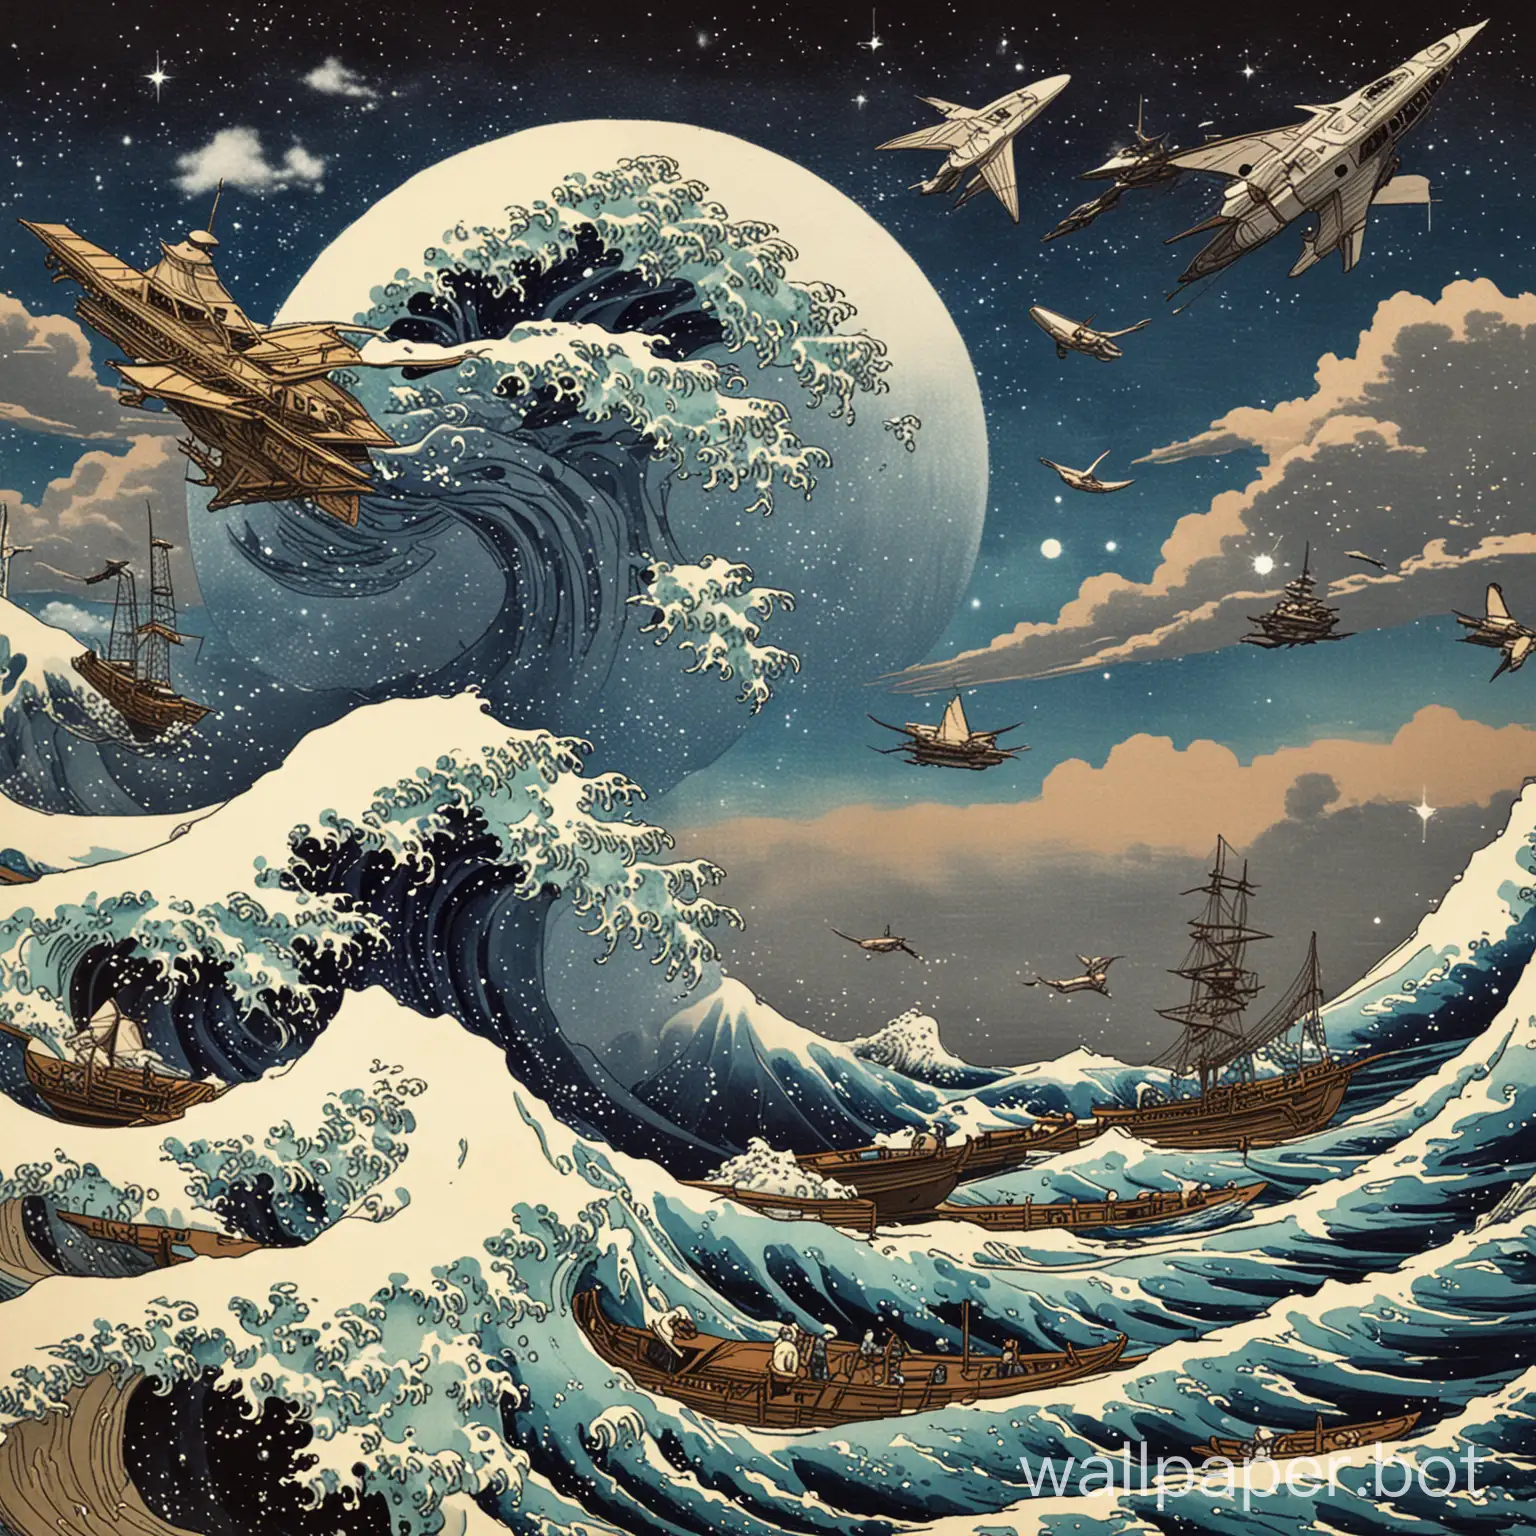 Futuristic-Rendition-of-The-Great-Wave-off-Kanagawa-with-Interstellar-Spaceships